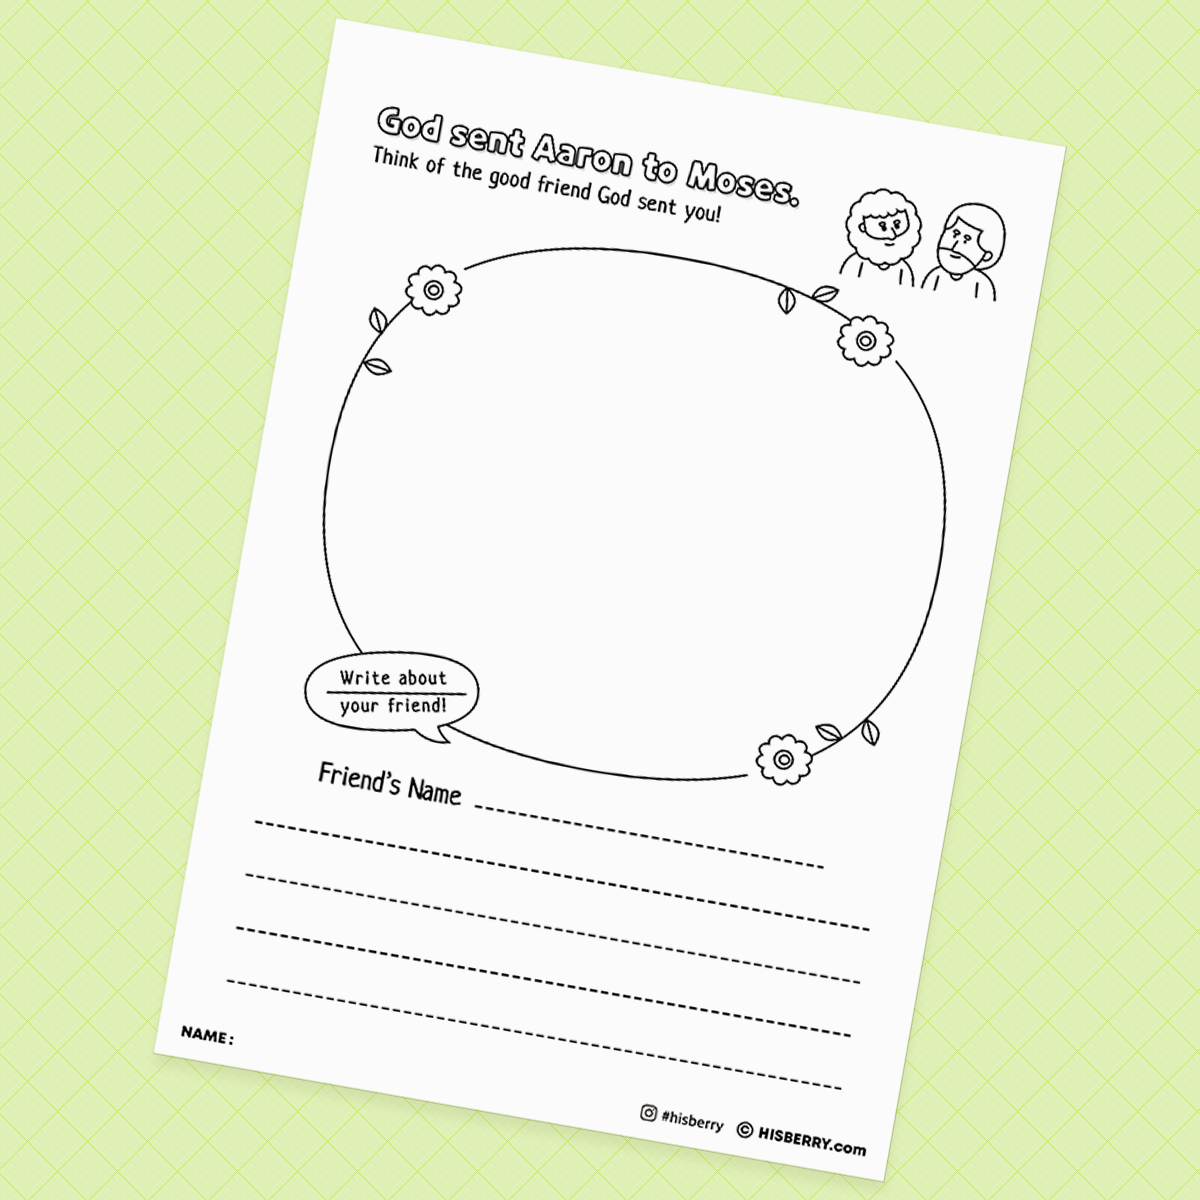 The Burning Bush - Creative Drawing Pages Printable